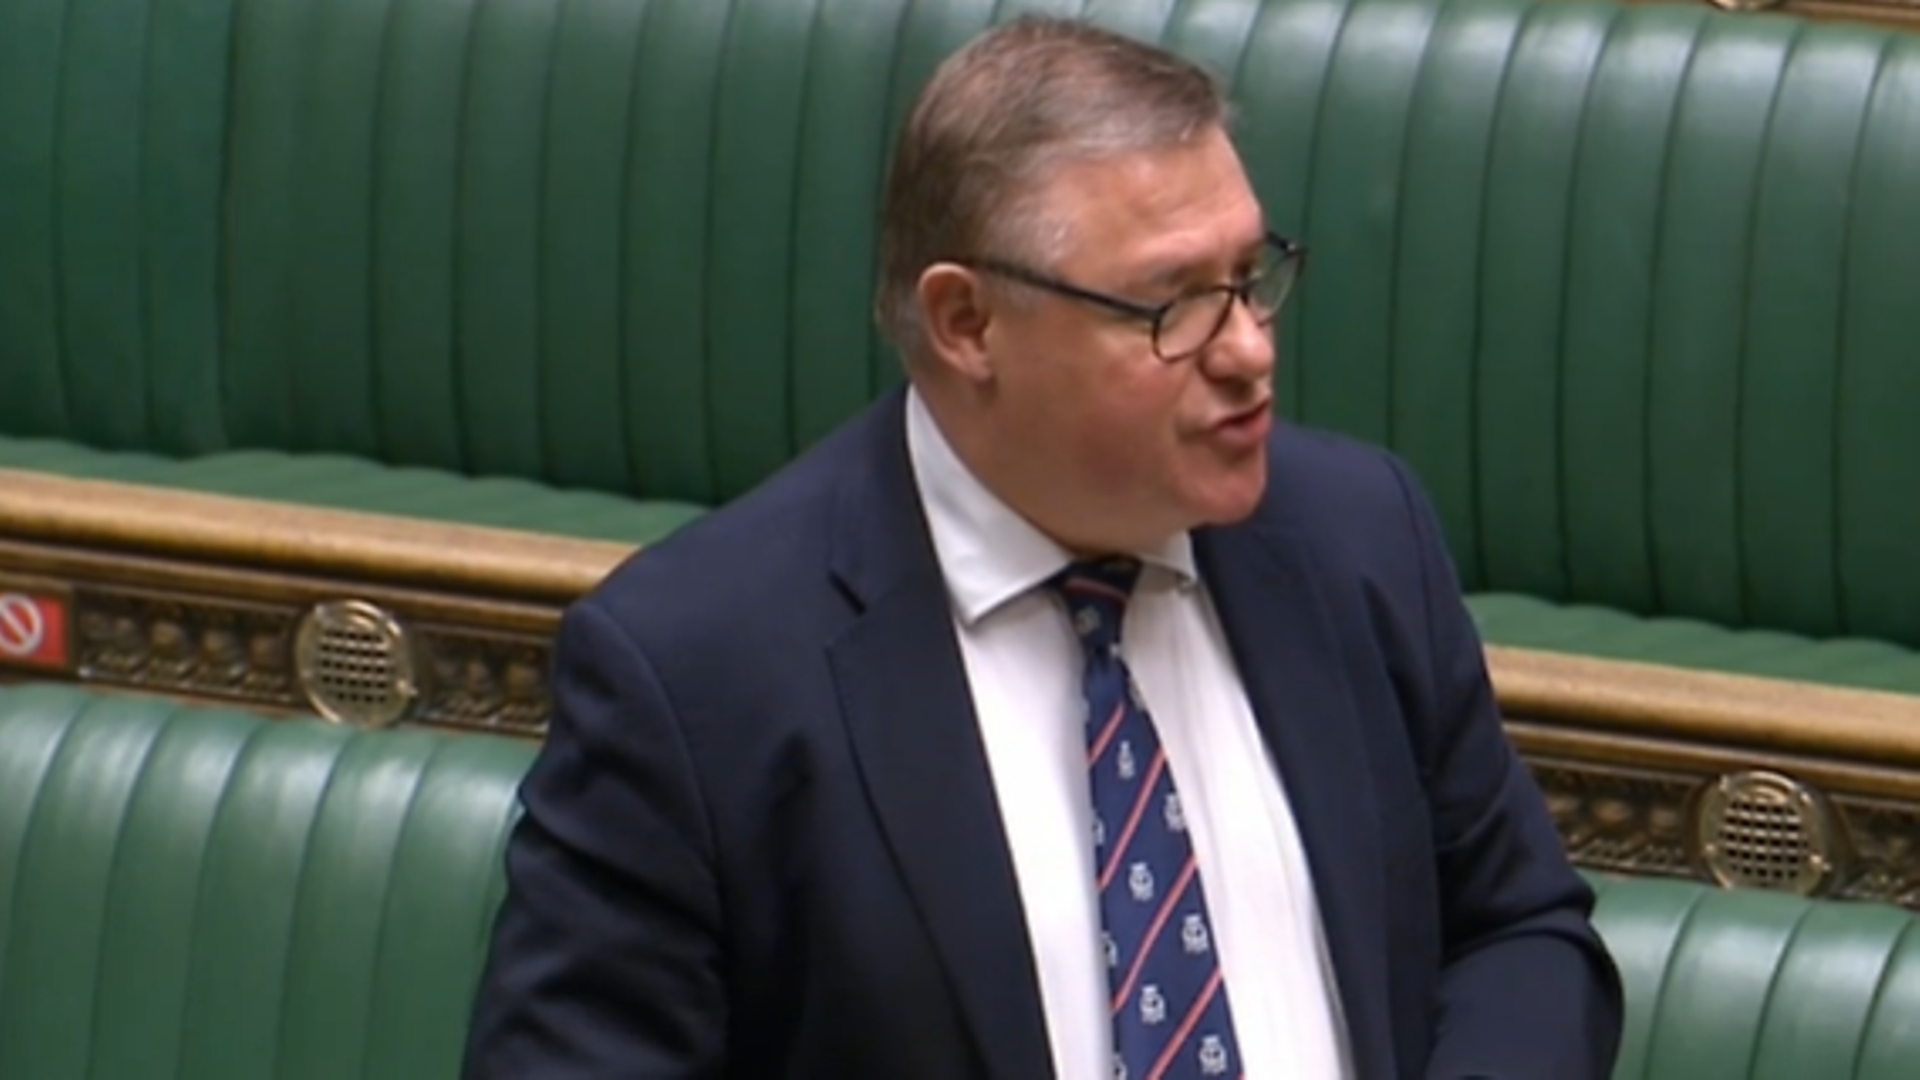 Mark Francois in the House of Commons - Credit: Parliament Live